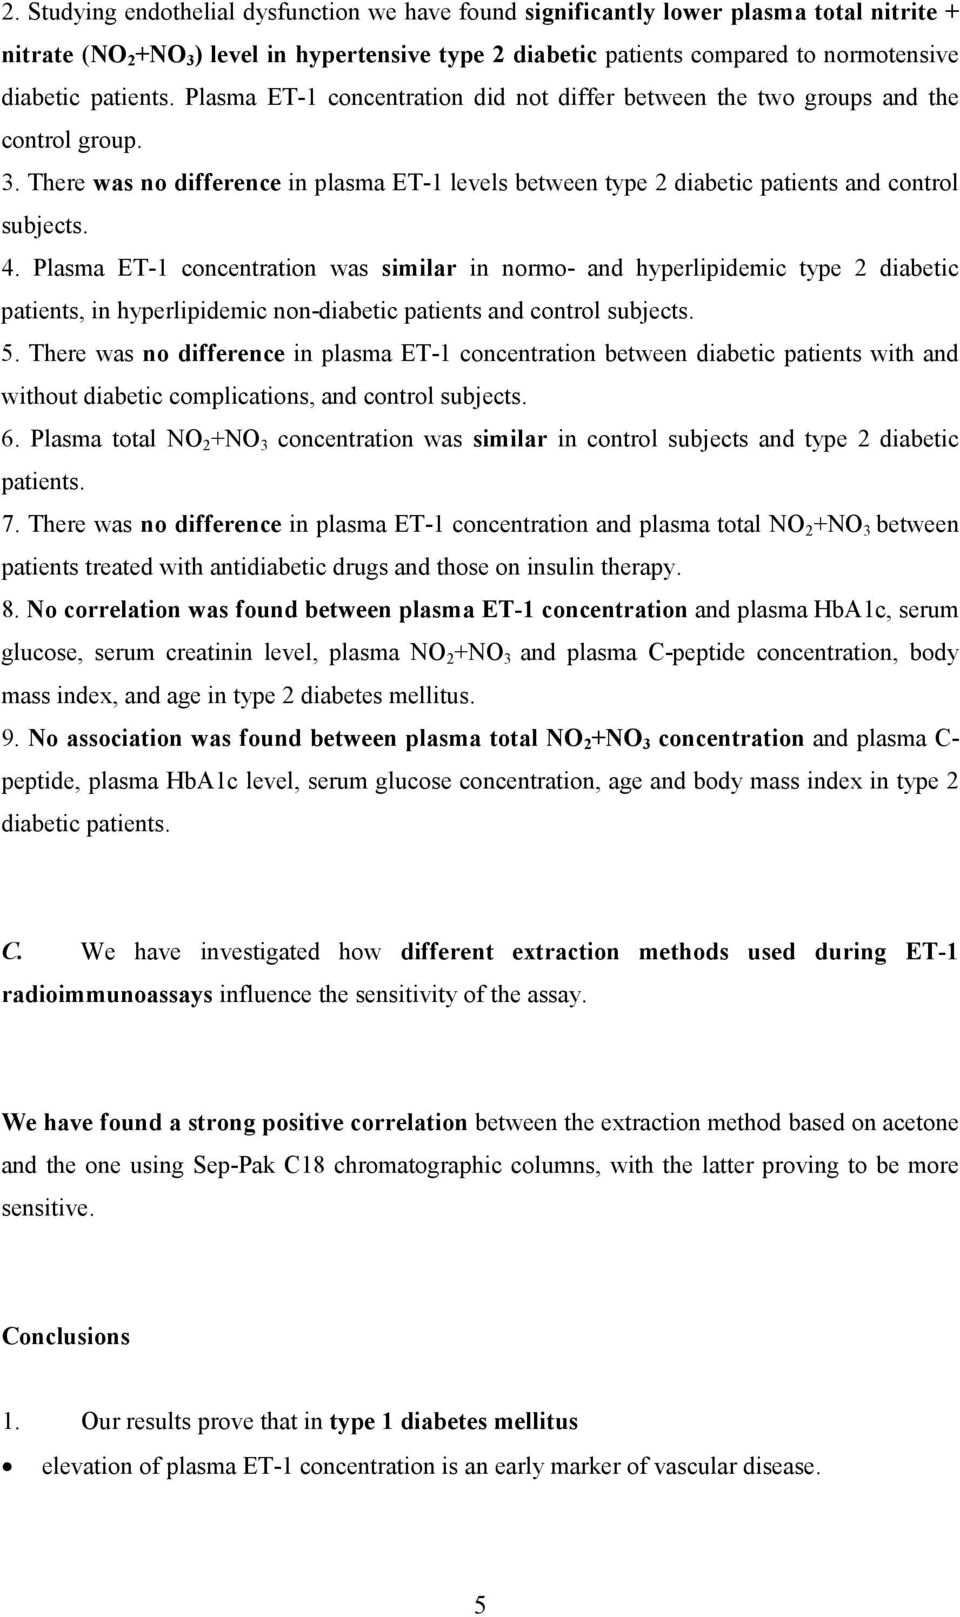 4. Plasma ET-1 concentration was similar in normo- and hyperlipidemic type 2 diabetic patients, in hyperlipidemic non-diabetic patients and control subjects. 5.